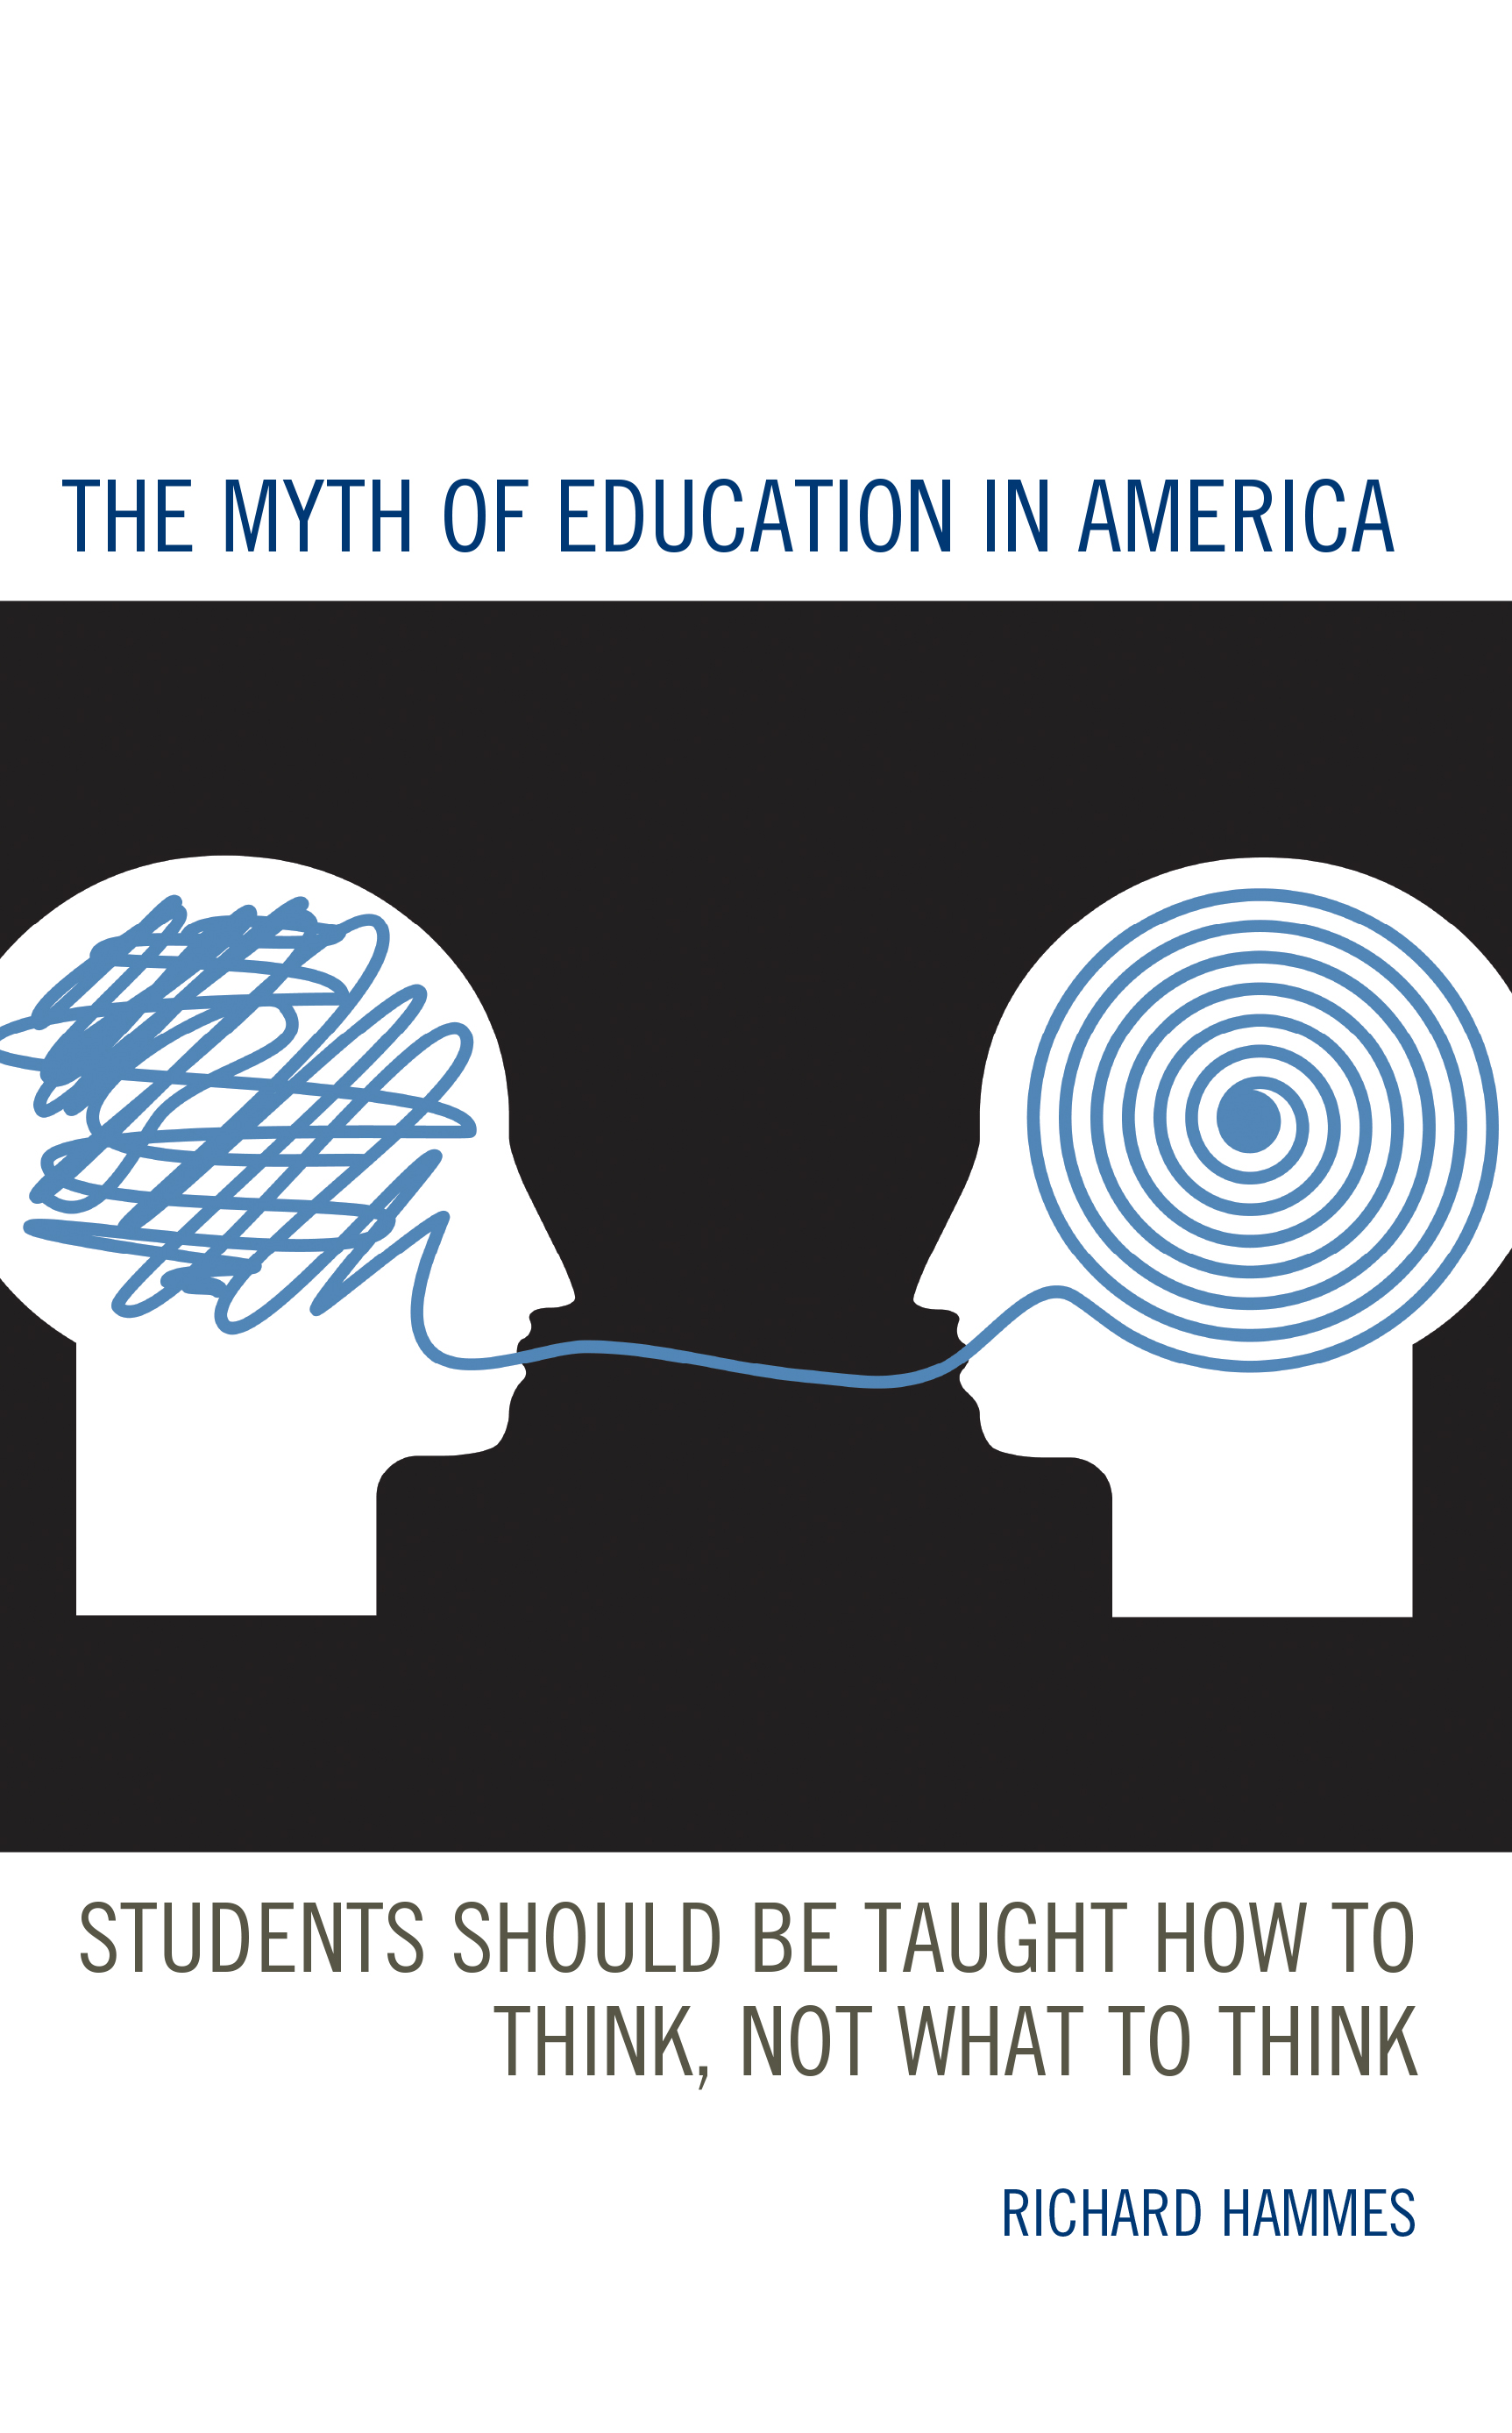 The Myth of Education in America: Students Should be Taught How to Think, Not What to Think